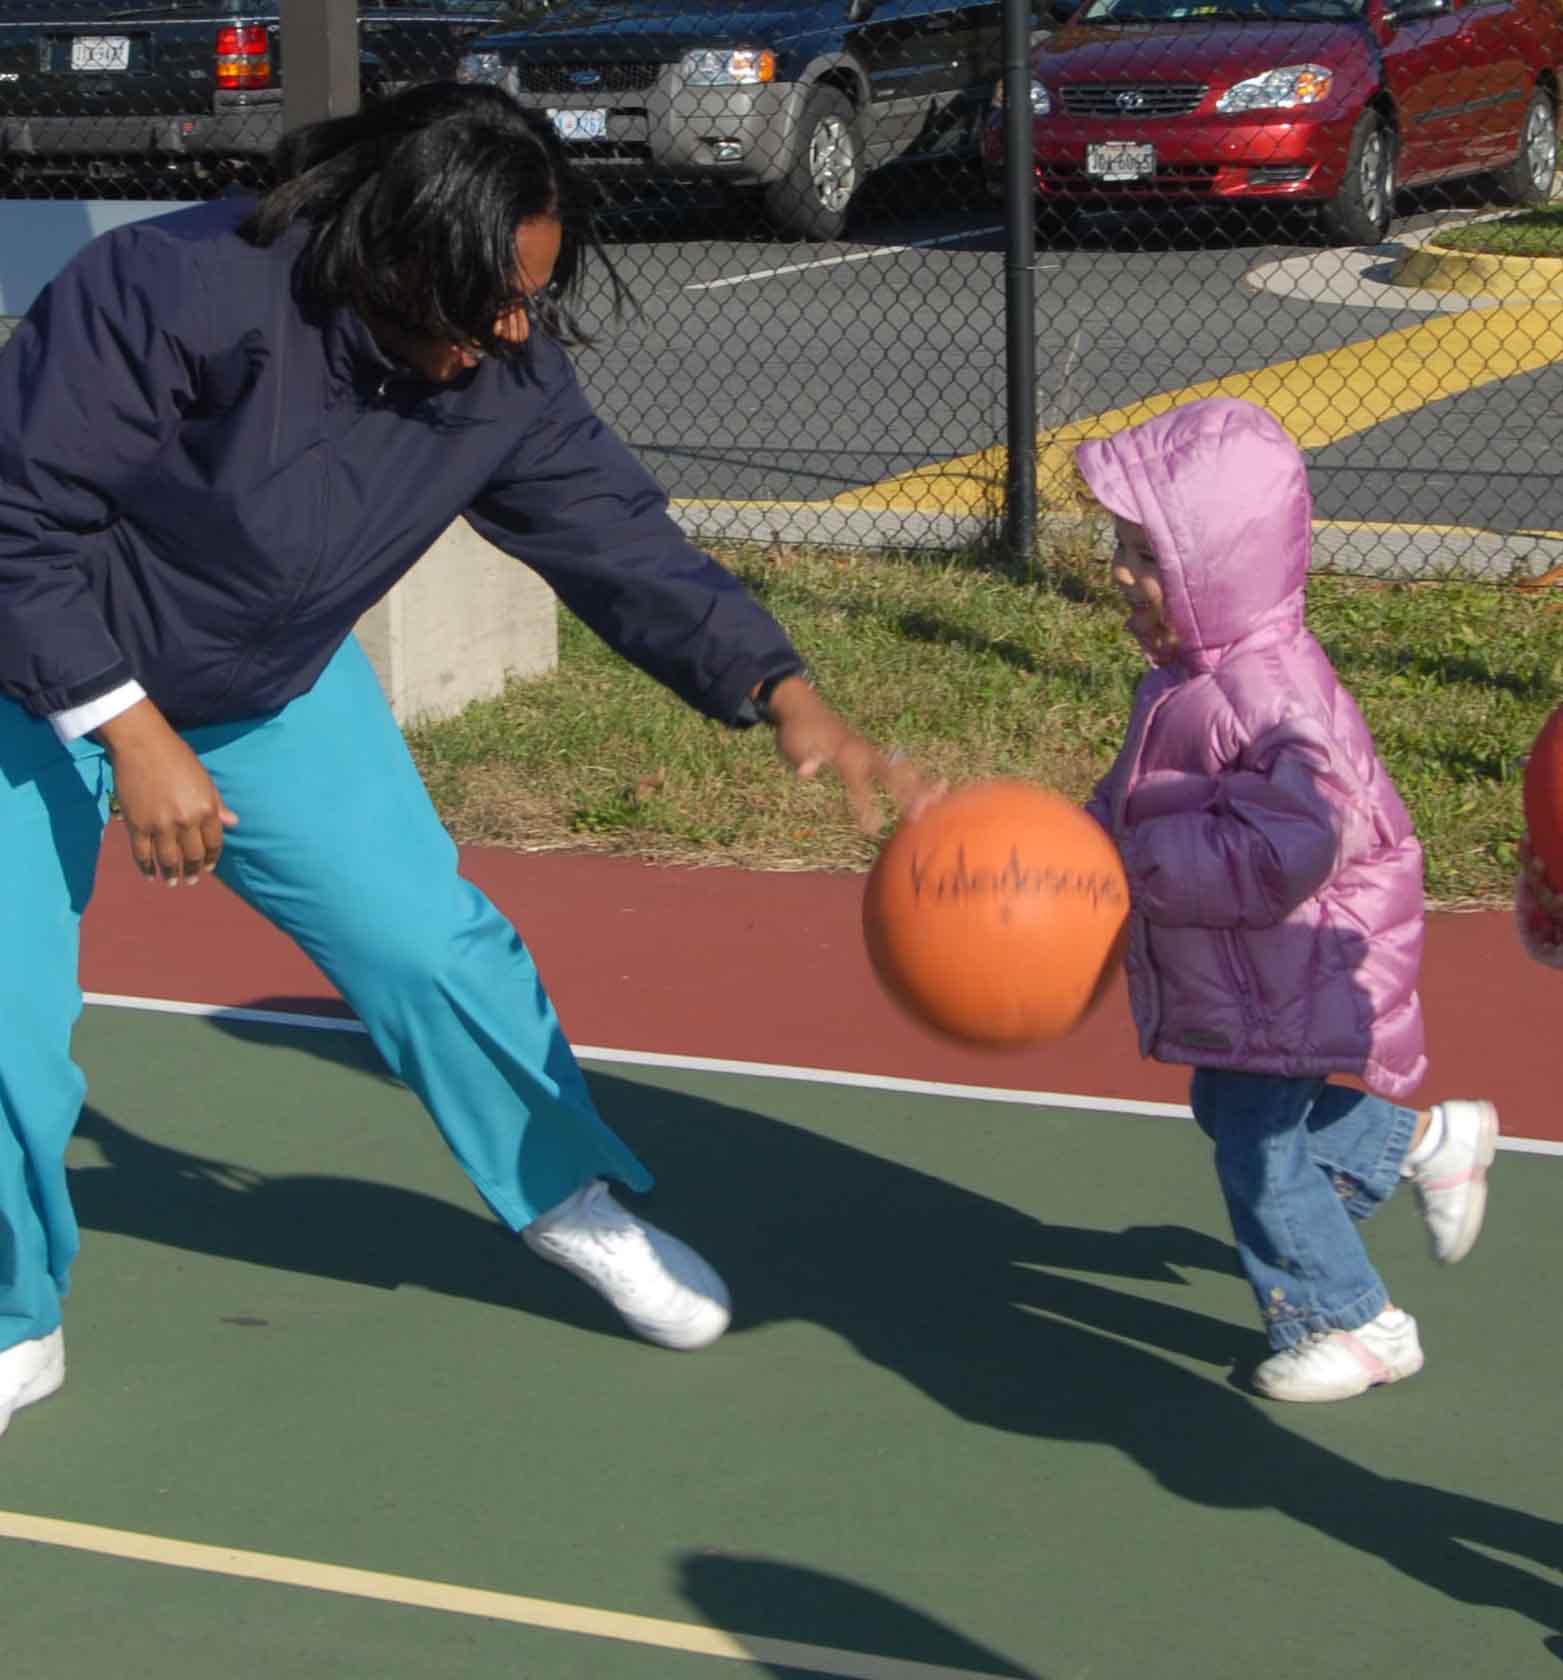 Young children need 60 minutes of active playtime to ensure good health.